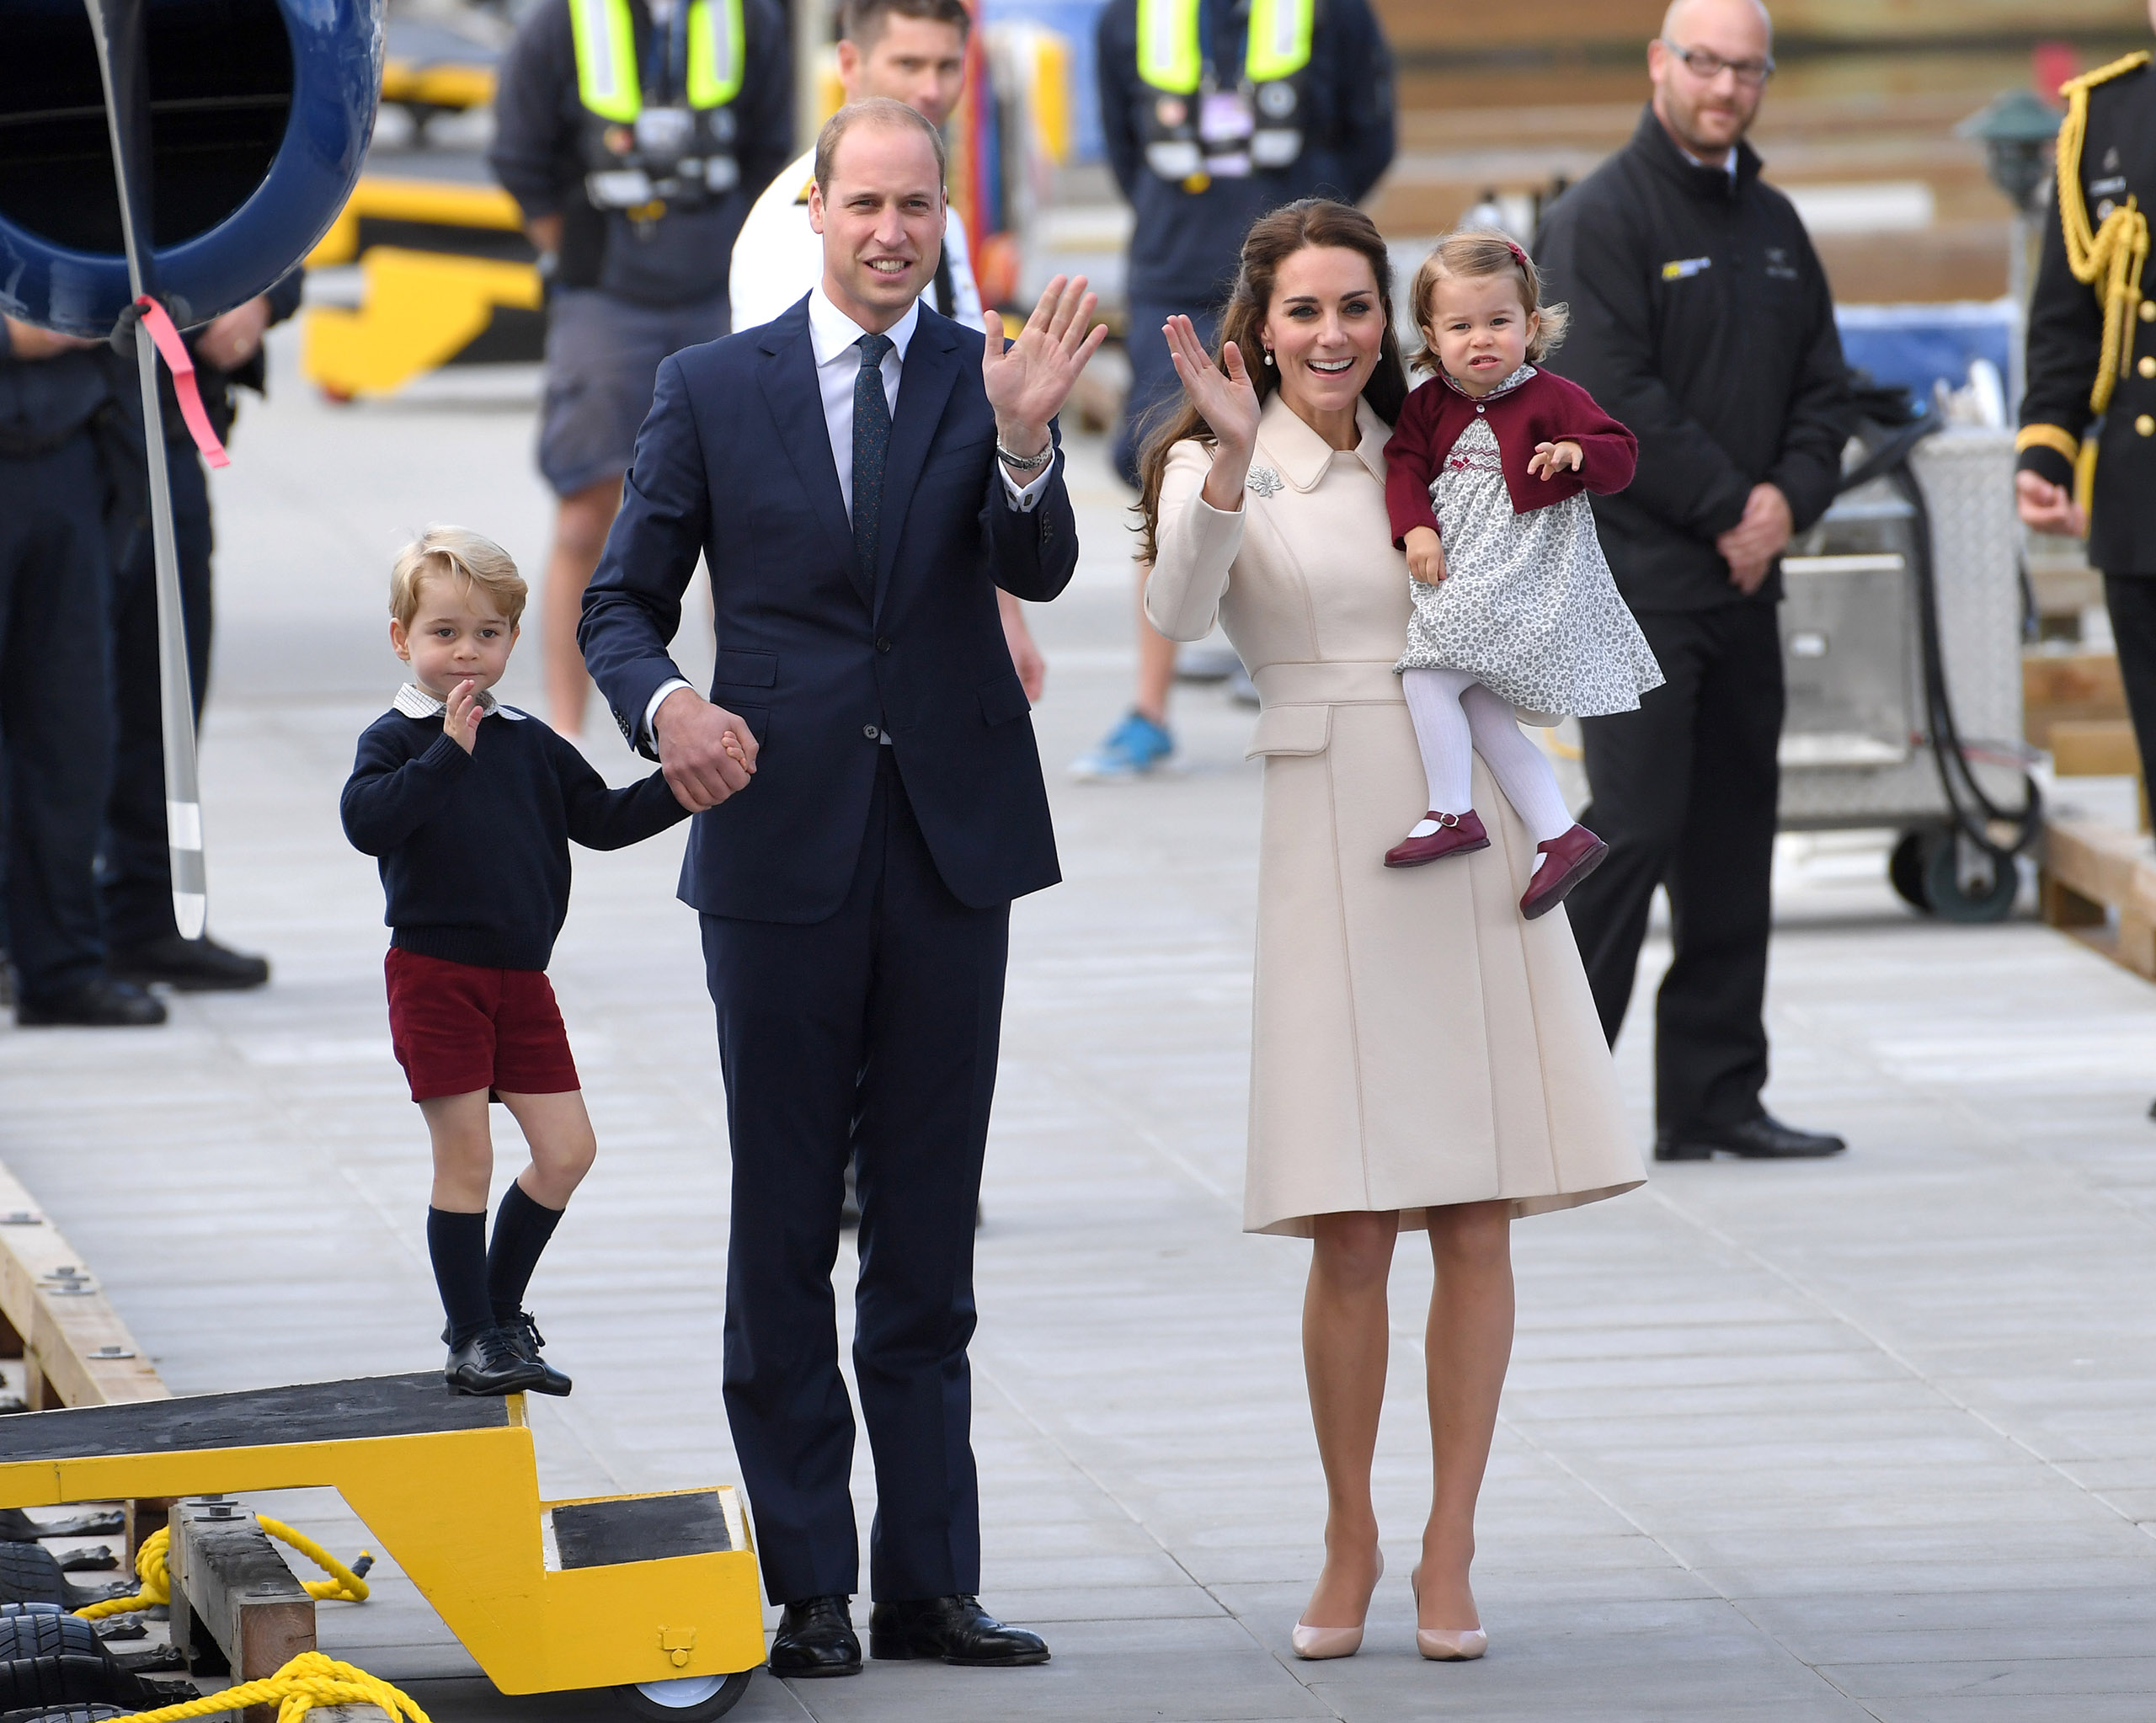 Catherine, Duchess of Cambridge, Prince William, Duke of Cambridge, Prince George and Princess Charlotte wave to well-wishers as they depart Victoria after their Royal Tour of Canada on Oct. 1, 2016.